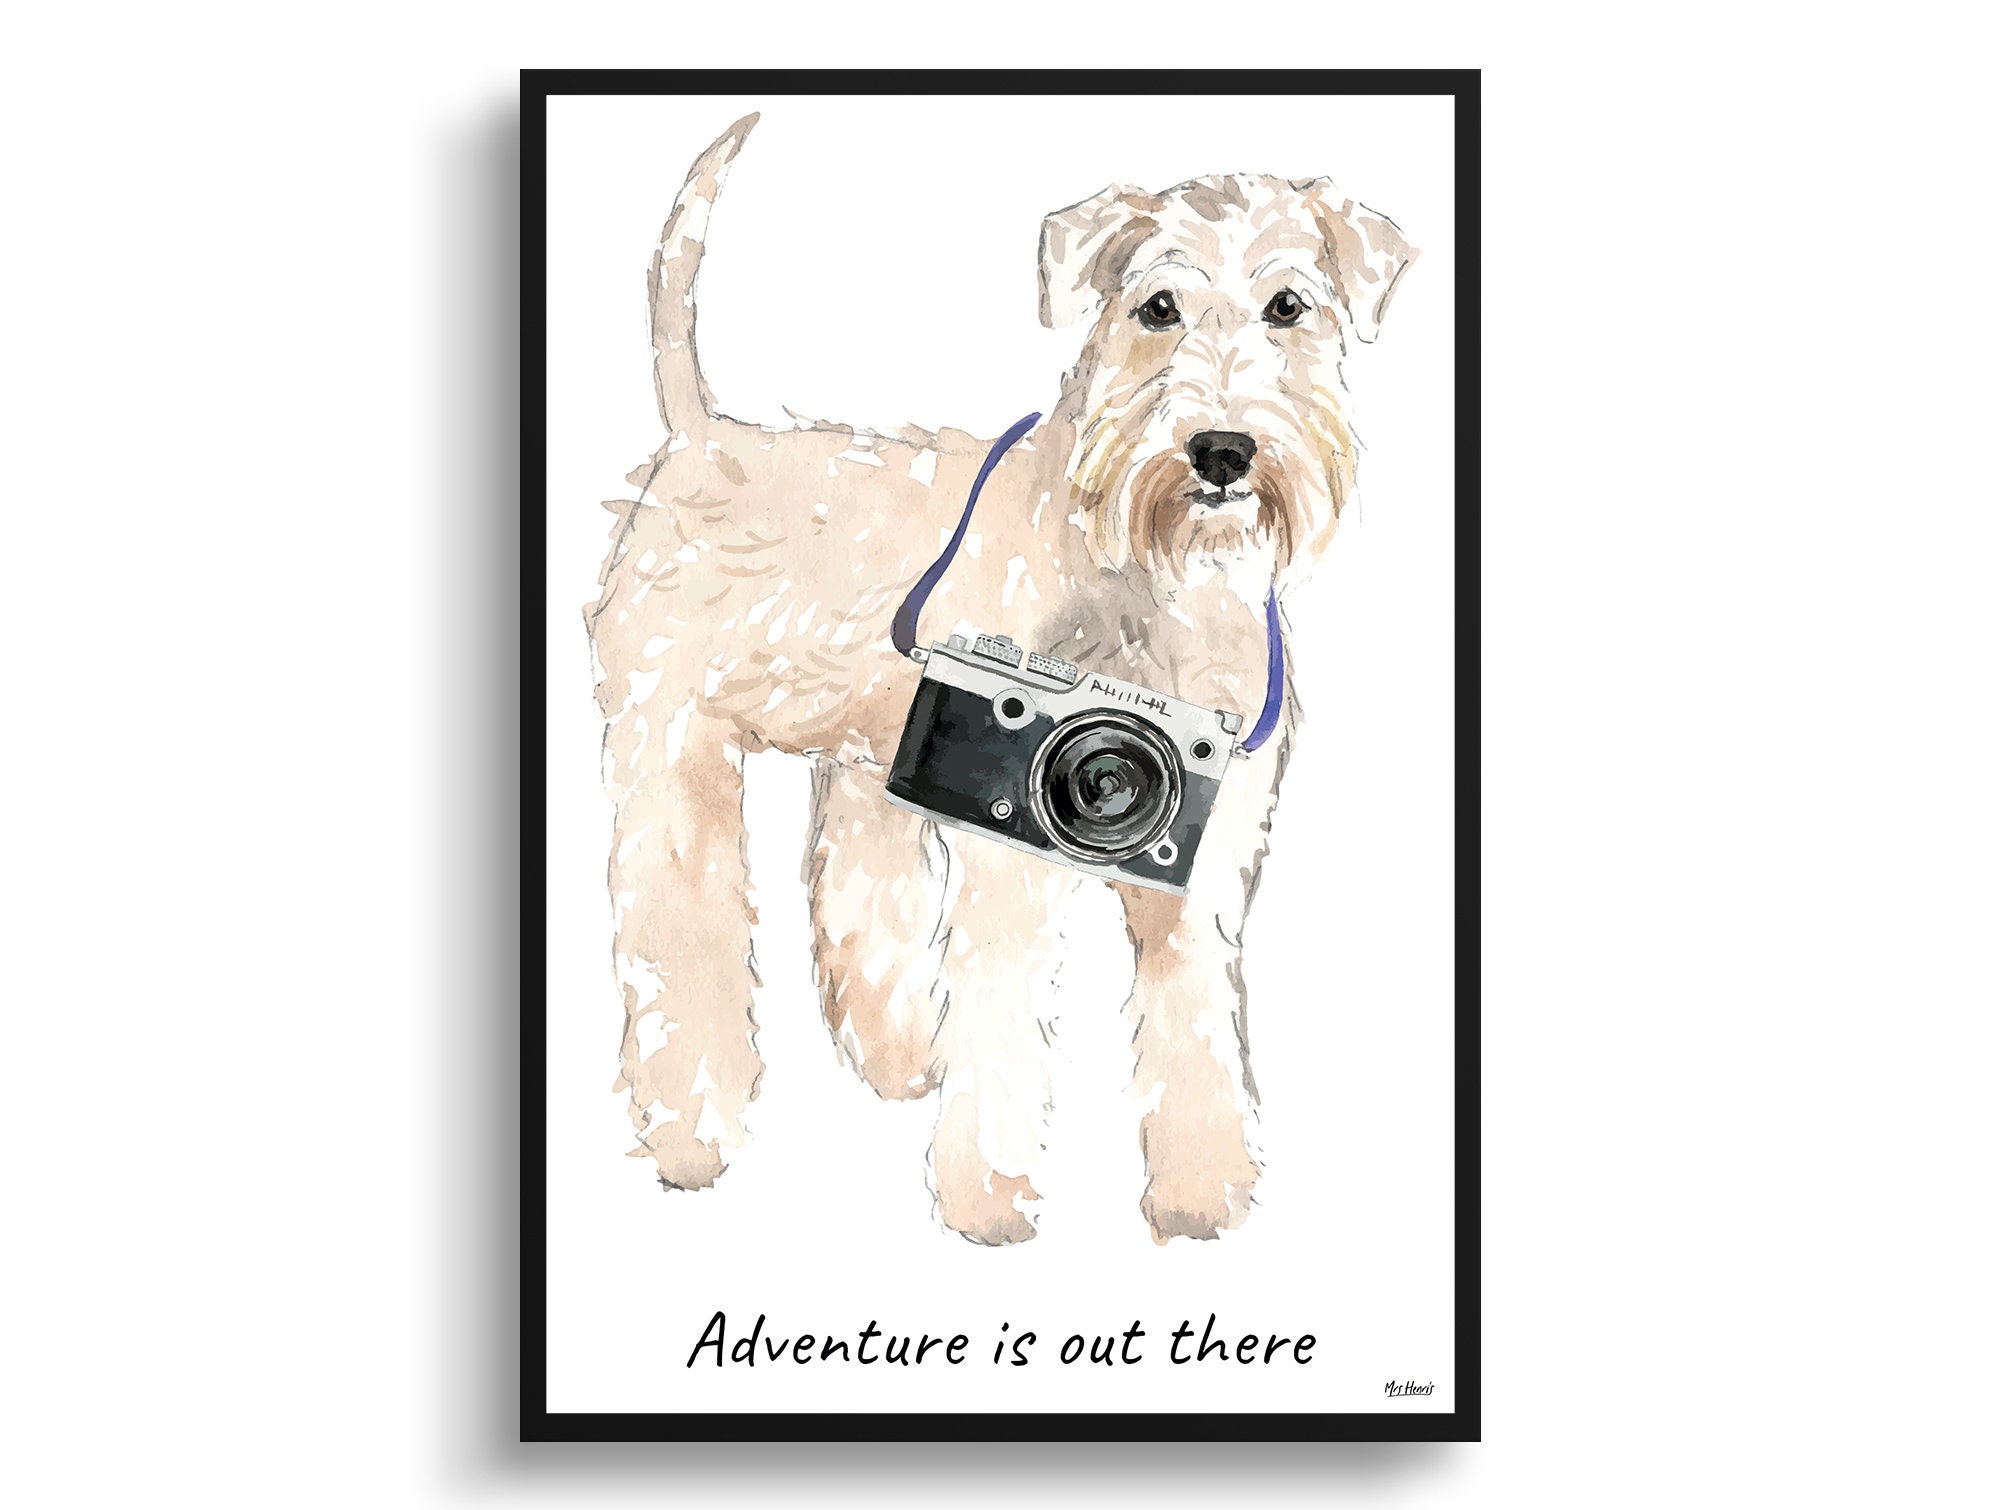 Adventure Is Out There Wheaten Terrier Dog Print Illustration. Framed & Un-Framed Wall Art Options. Personalised Name